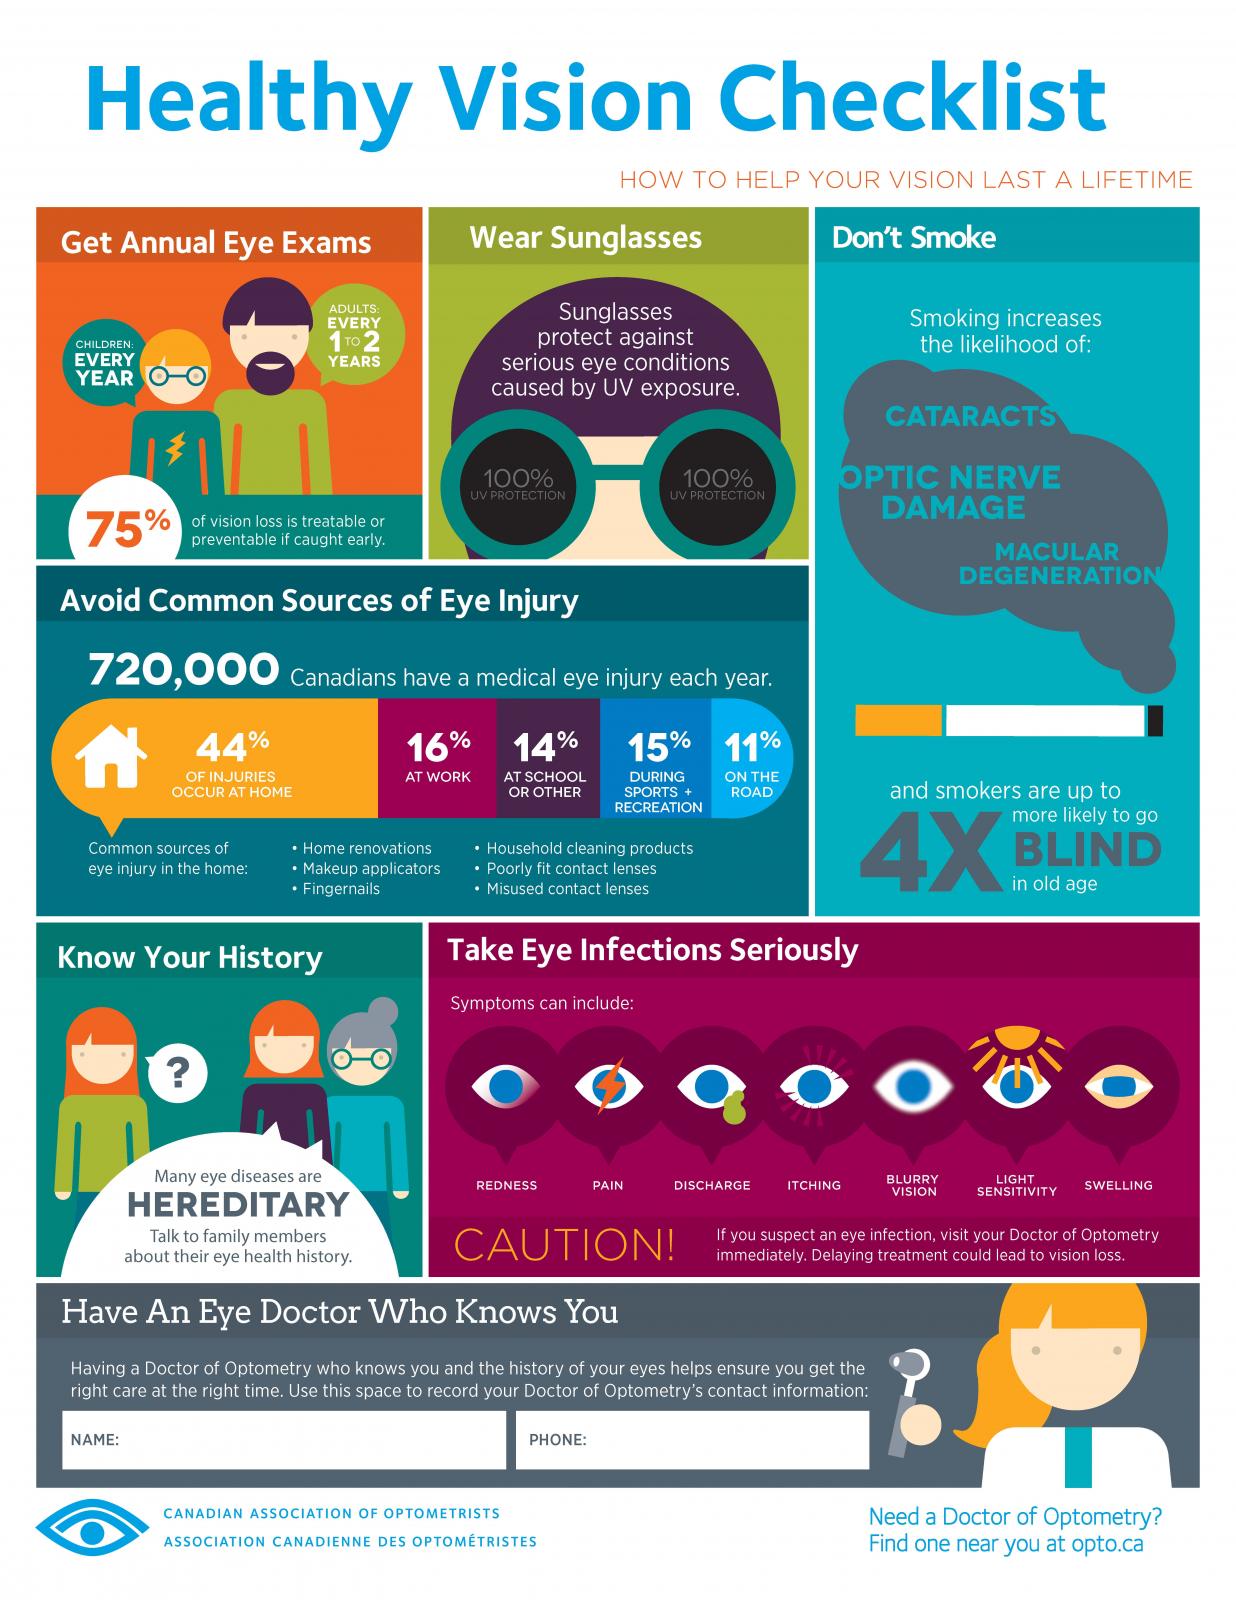 "Healthy Vision Checklist" infographic